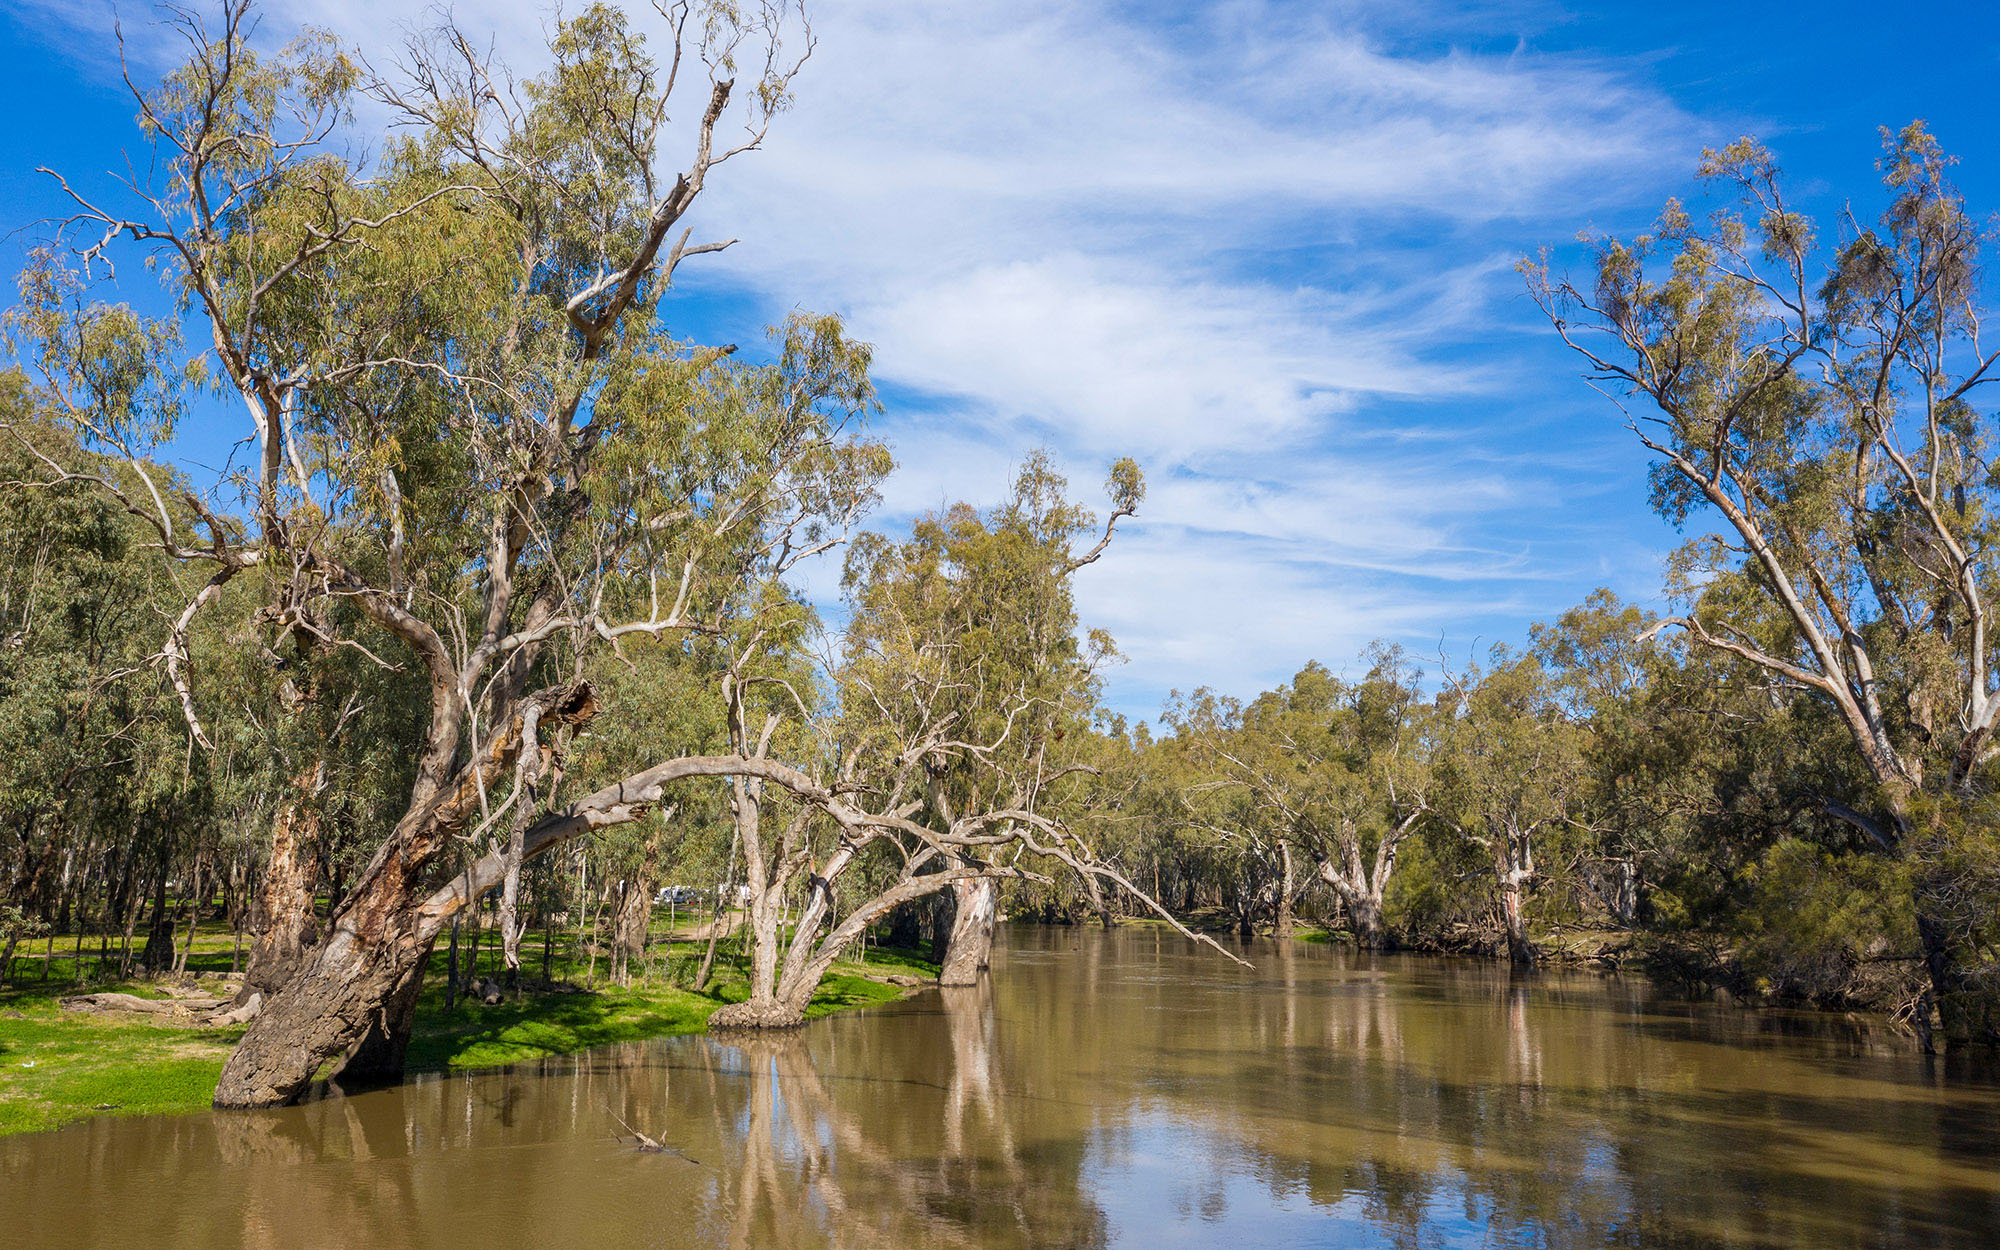 The Lachlan river in the central west of New South Wales, Australia.